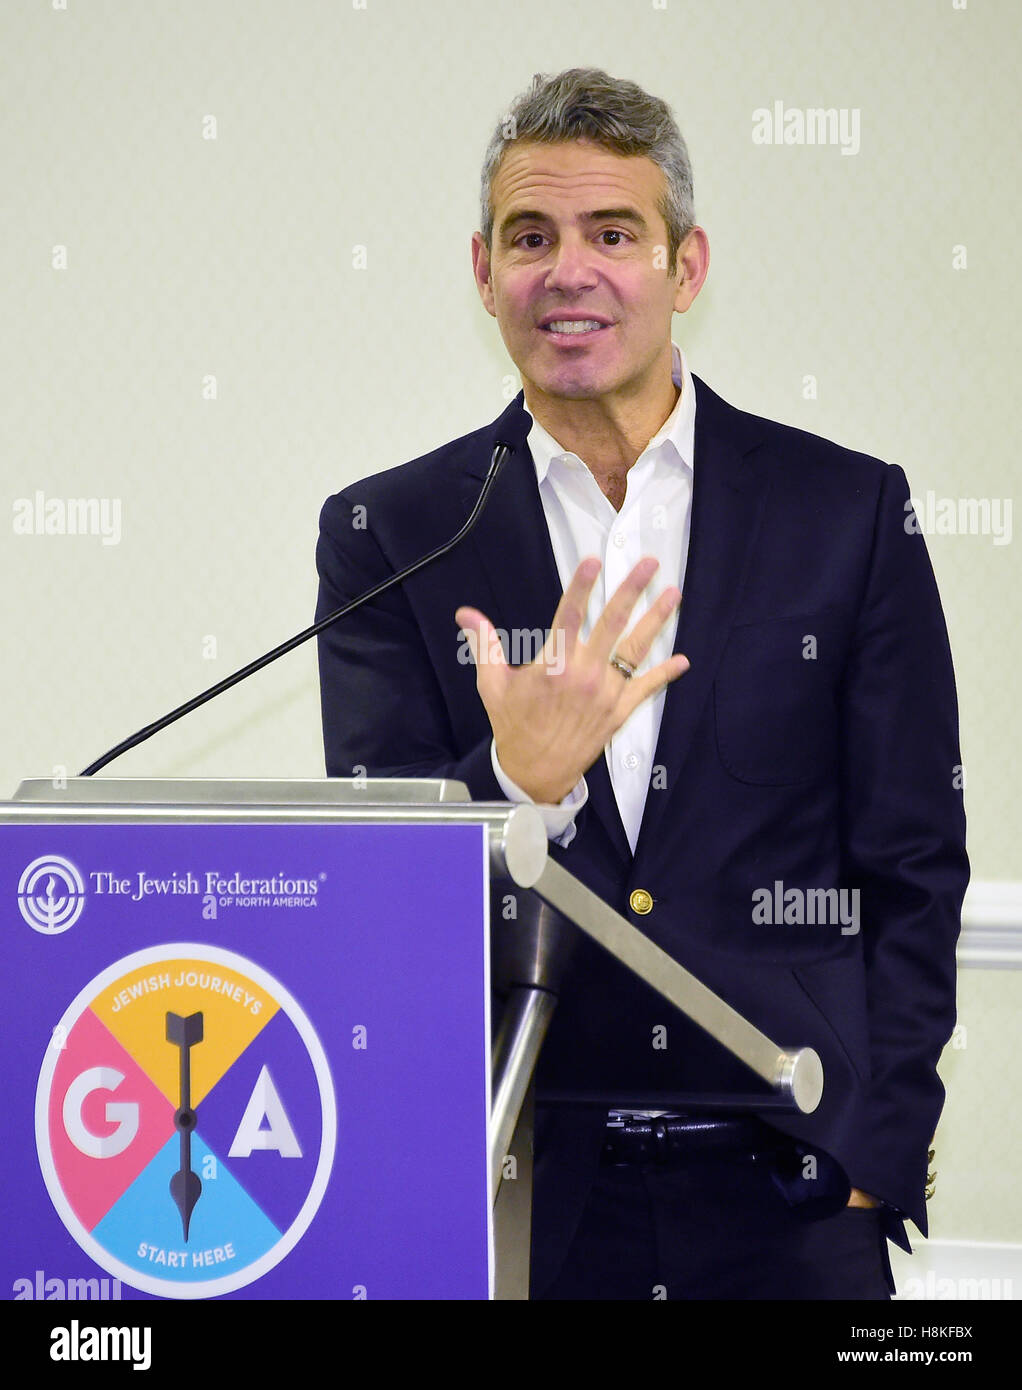 Andy Cohen, Emmy Award-winning television host and developer of the 'Real Housewives' franchise, addresses more than a hundred top Jewish leaders over lunch at an exclusive session during the General Assembly of the Jewish Federations of North America on Sunday, November 13, 2016. Speaking for nearly an hour at the Washington Hilton in Washington, DC, he spoke at length about his Jewish roots and his new tell-all book 'Superficial: More Adventures from the Andy Cohen Diaries,' due out this week. Credit: Ron Sachs/CNP · NO WIRE SERVICE · Stock Photo